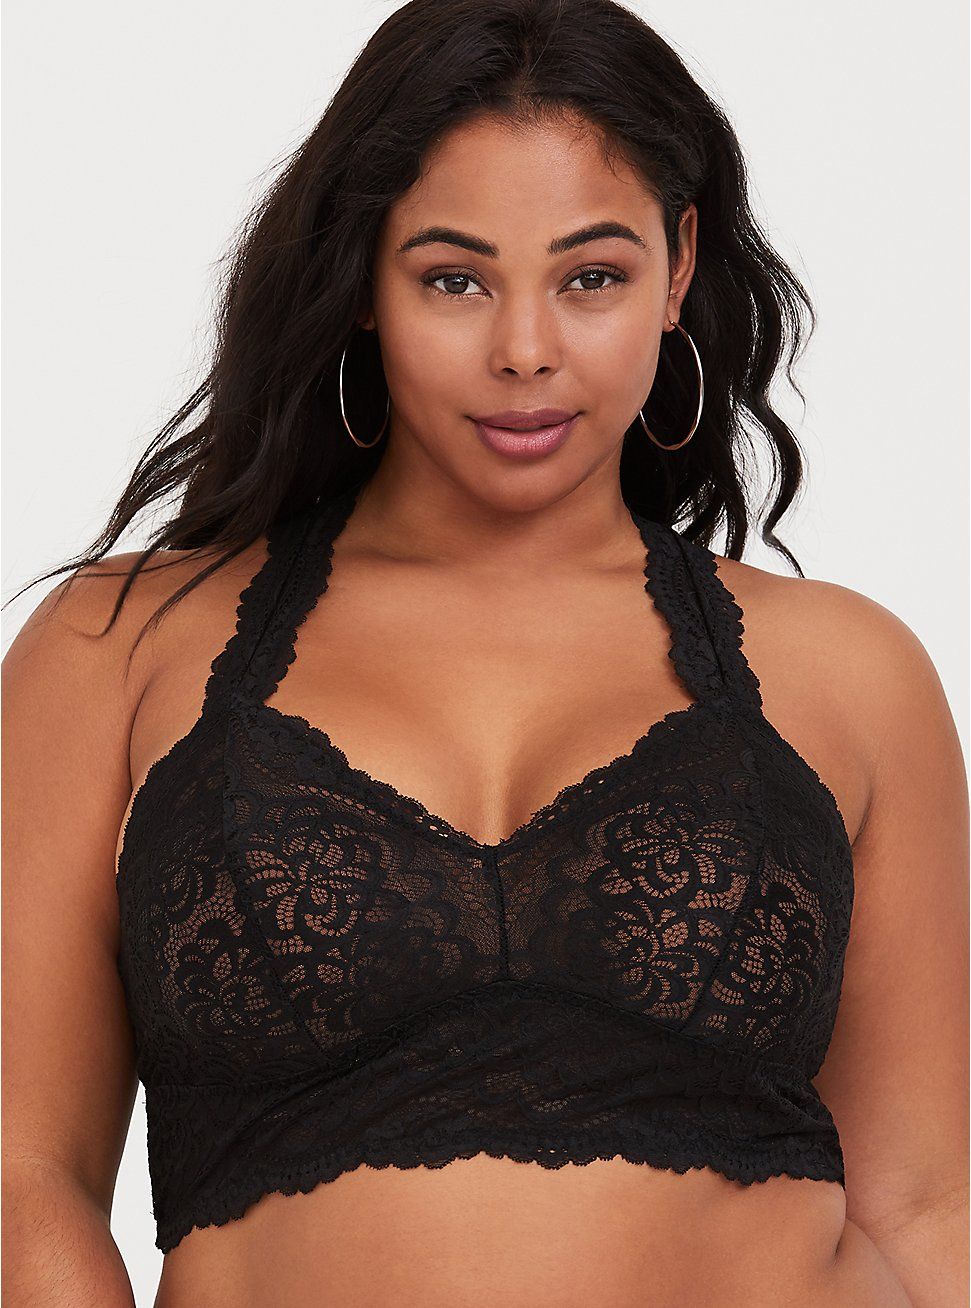 The bralette for larger busts